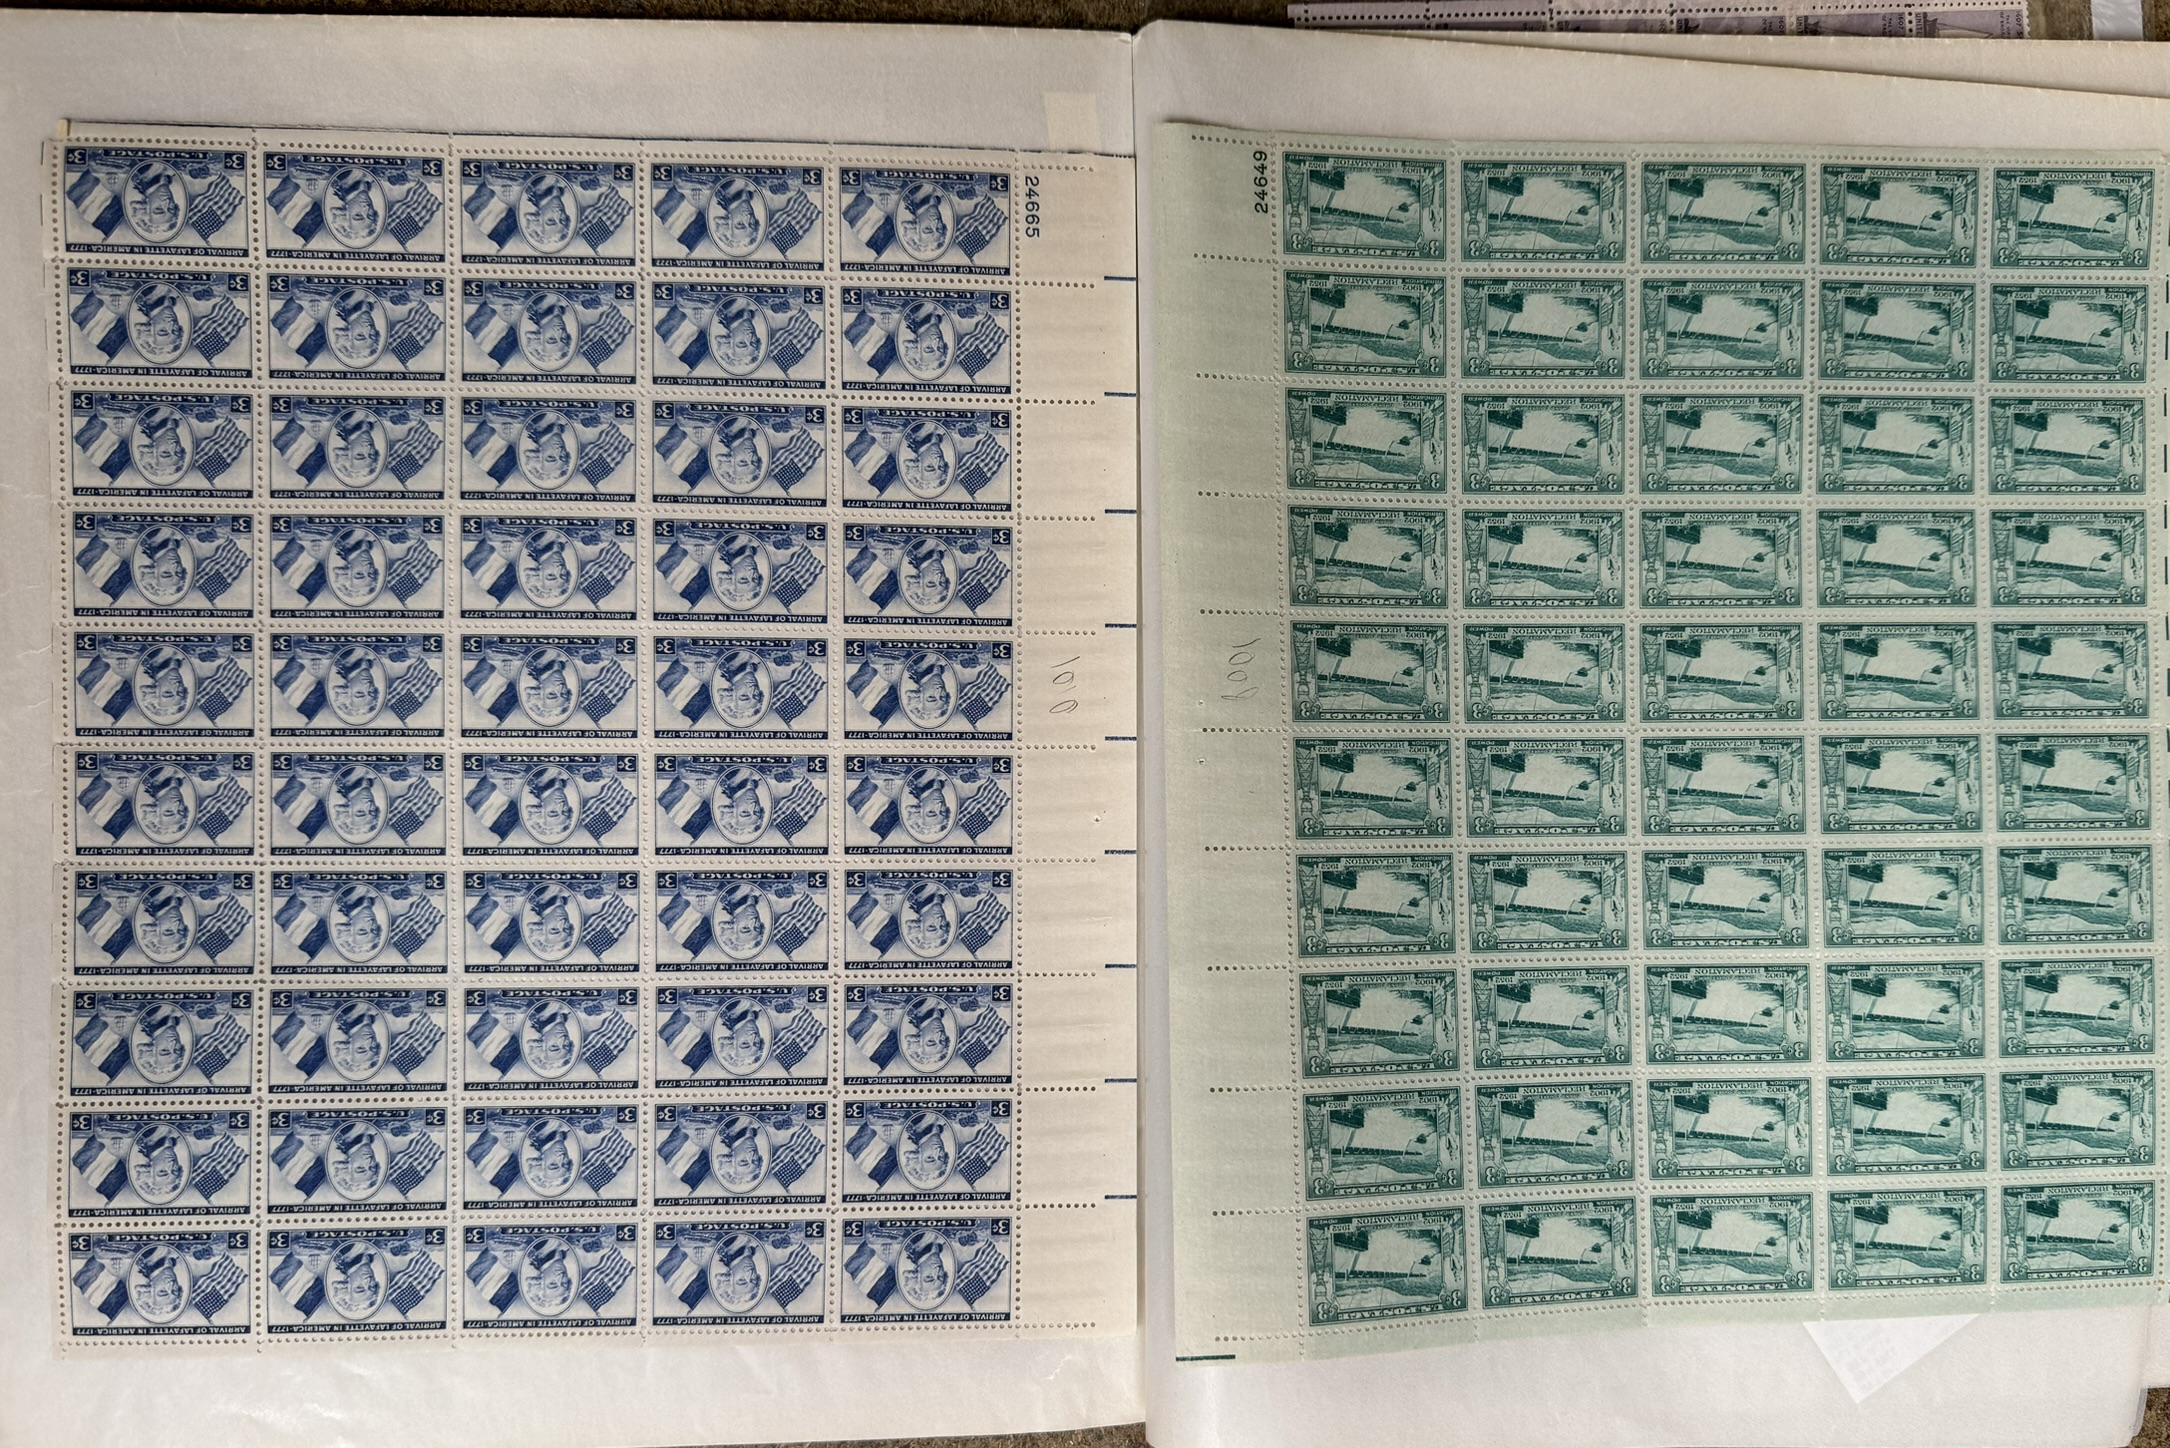 A folder of Double Mint Sheets including 3 Cents US Postage Abraham Lincoln, Nevada 1851-1951, - Image 8 of 9